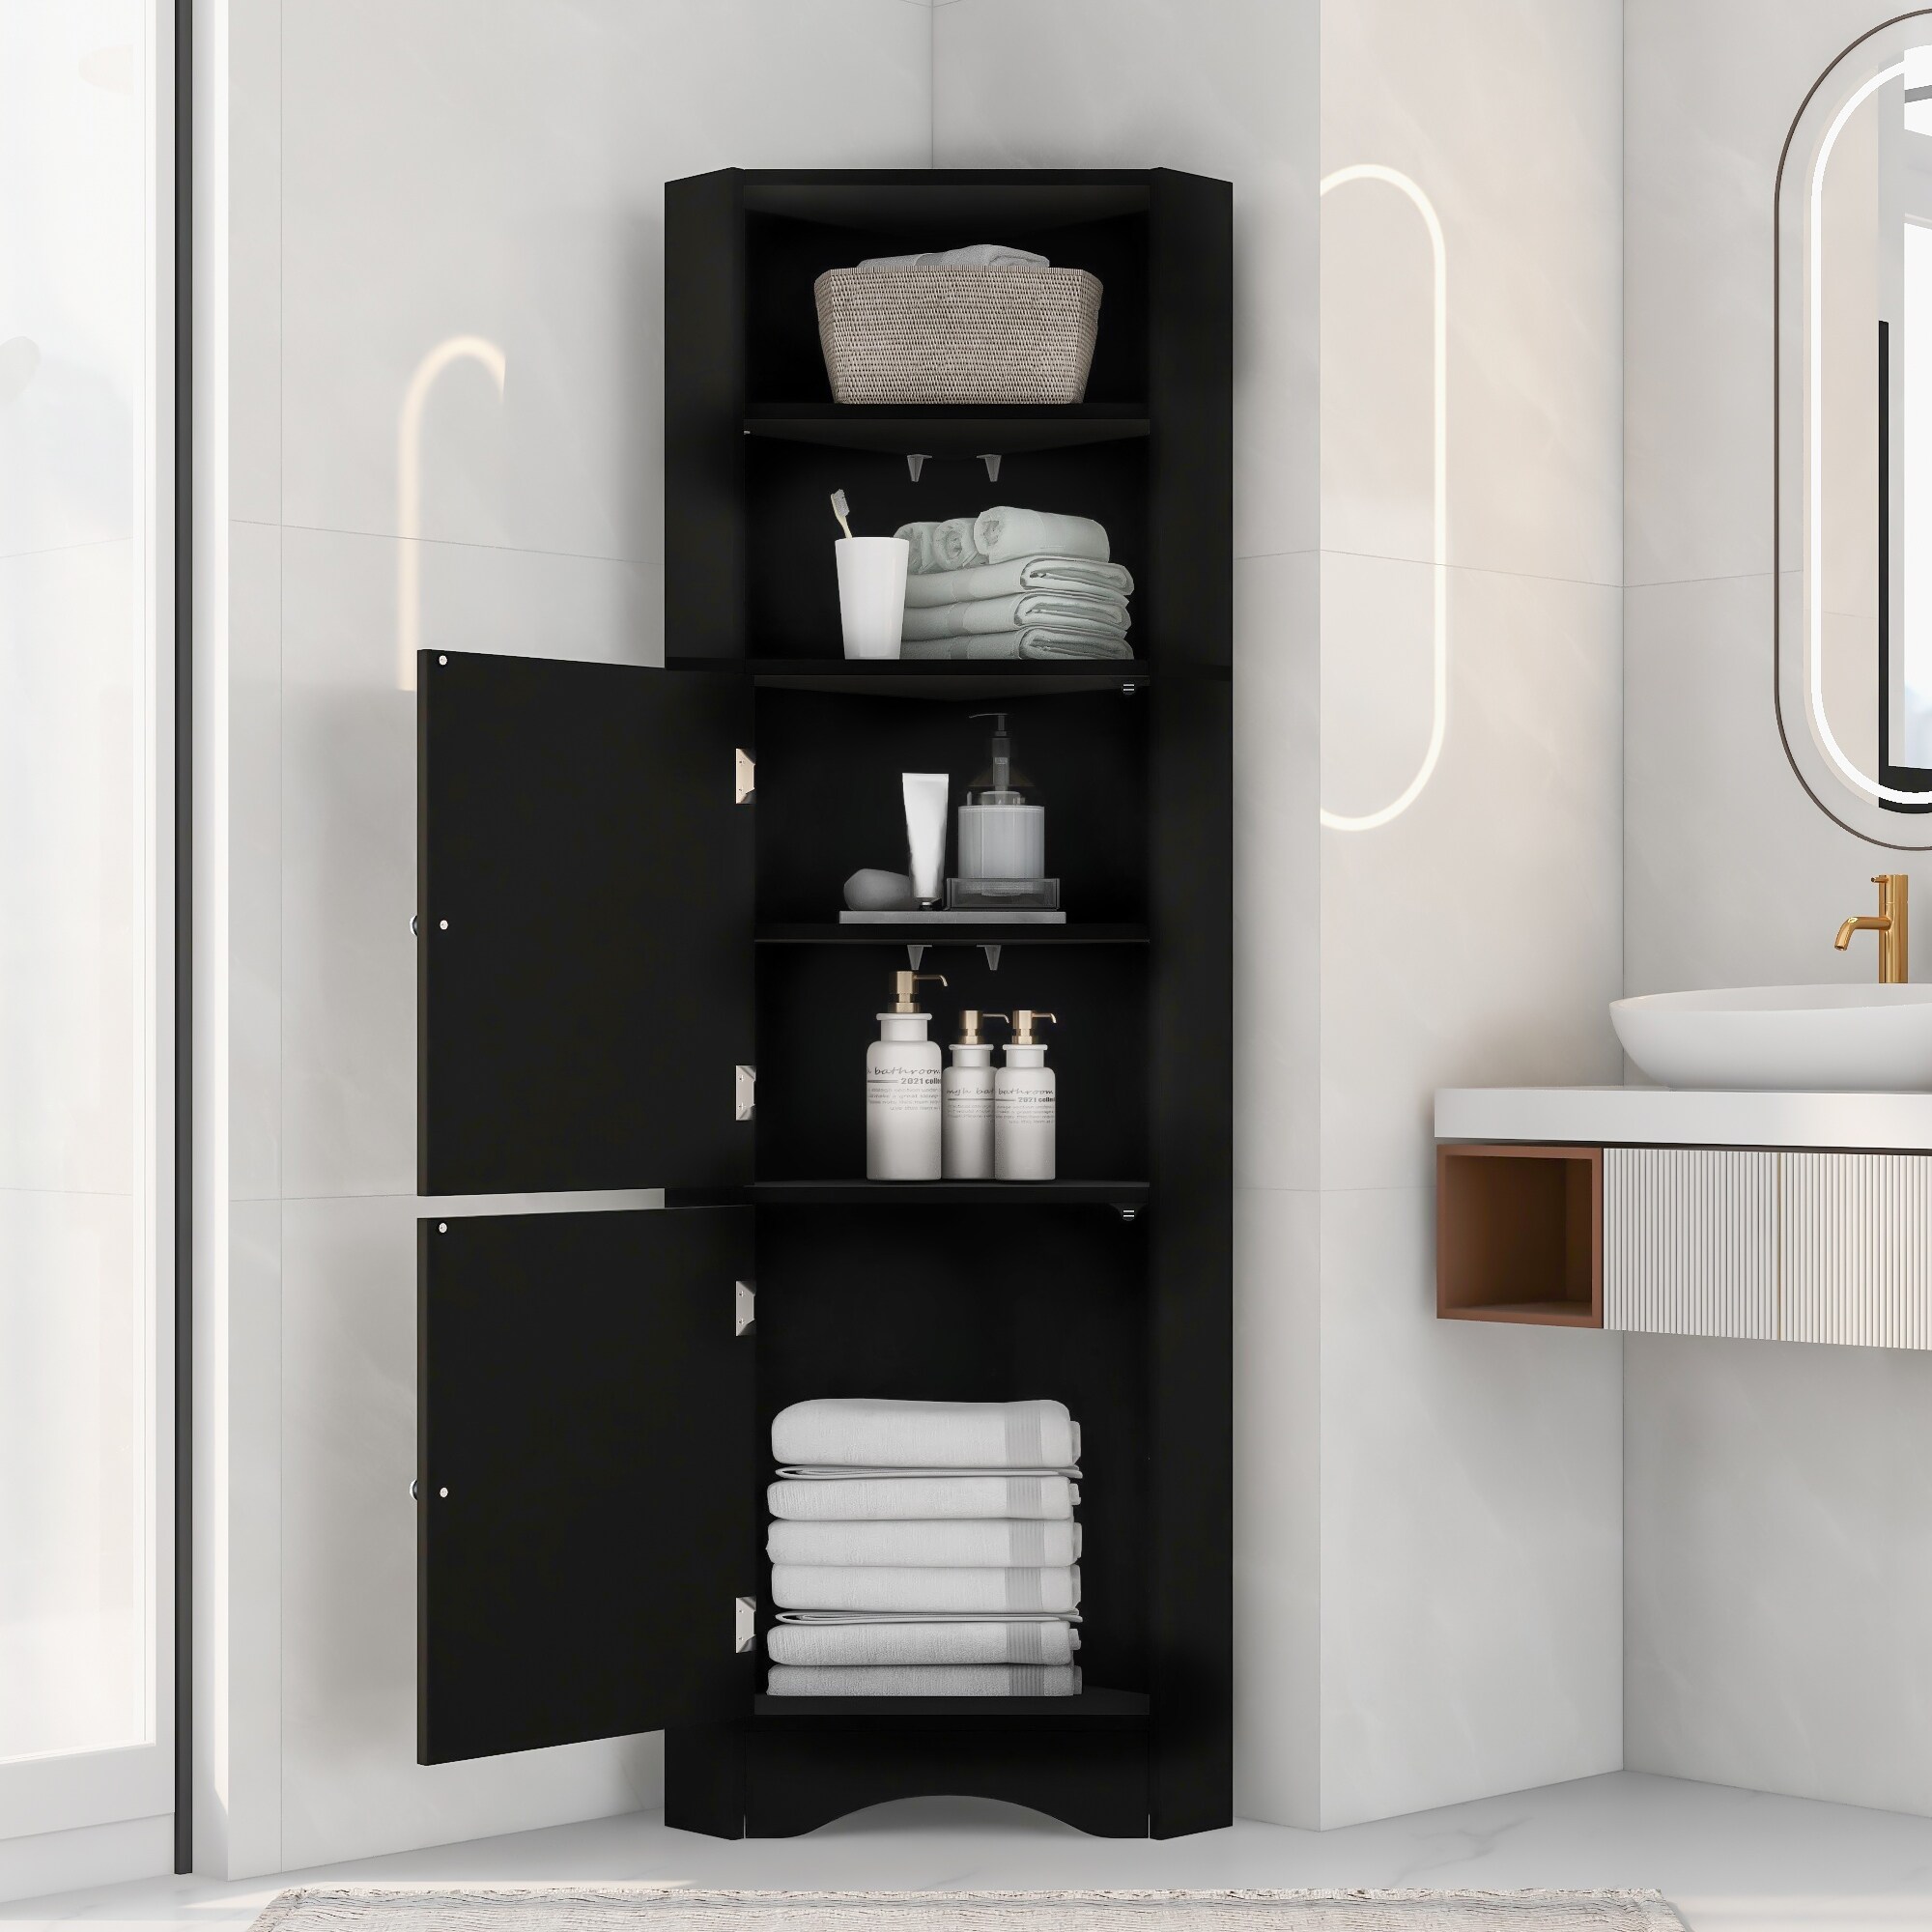 https://ak1.ostkcdn.com/images/products/is/images/direct/79627744f71e92afb19286b14a50666ccdff829c/Free-Standing-Corner-Storage-Cabinet-Waterproof-Gap-Storage-Rack-for-Bathroom%2C-Triangle-Bathroom-Cabinet-with-Adjustable-Shelf.jpg